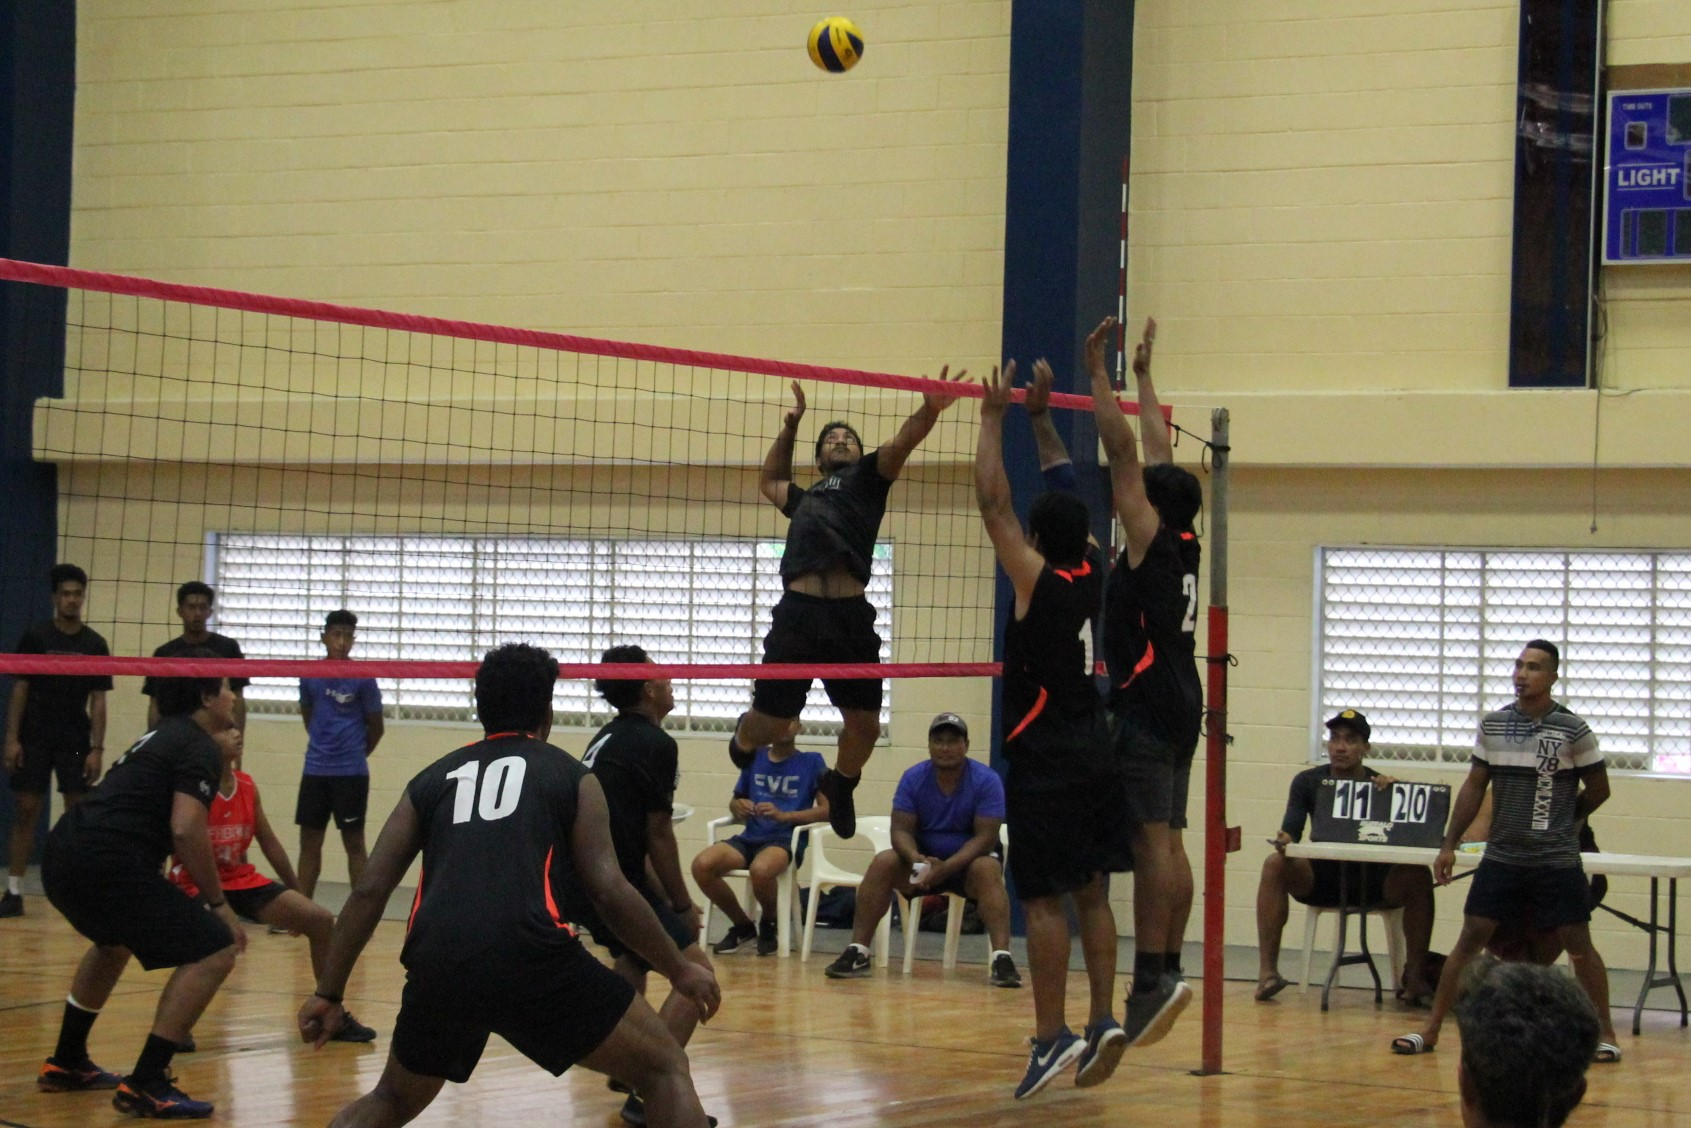 National University of Samoa students will assist with coverage of volleyball competition ©Samoa 2019